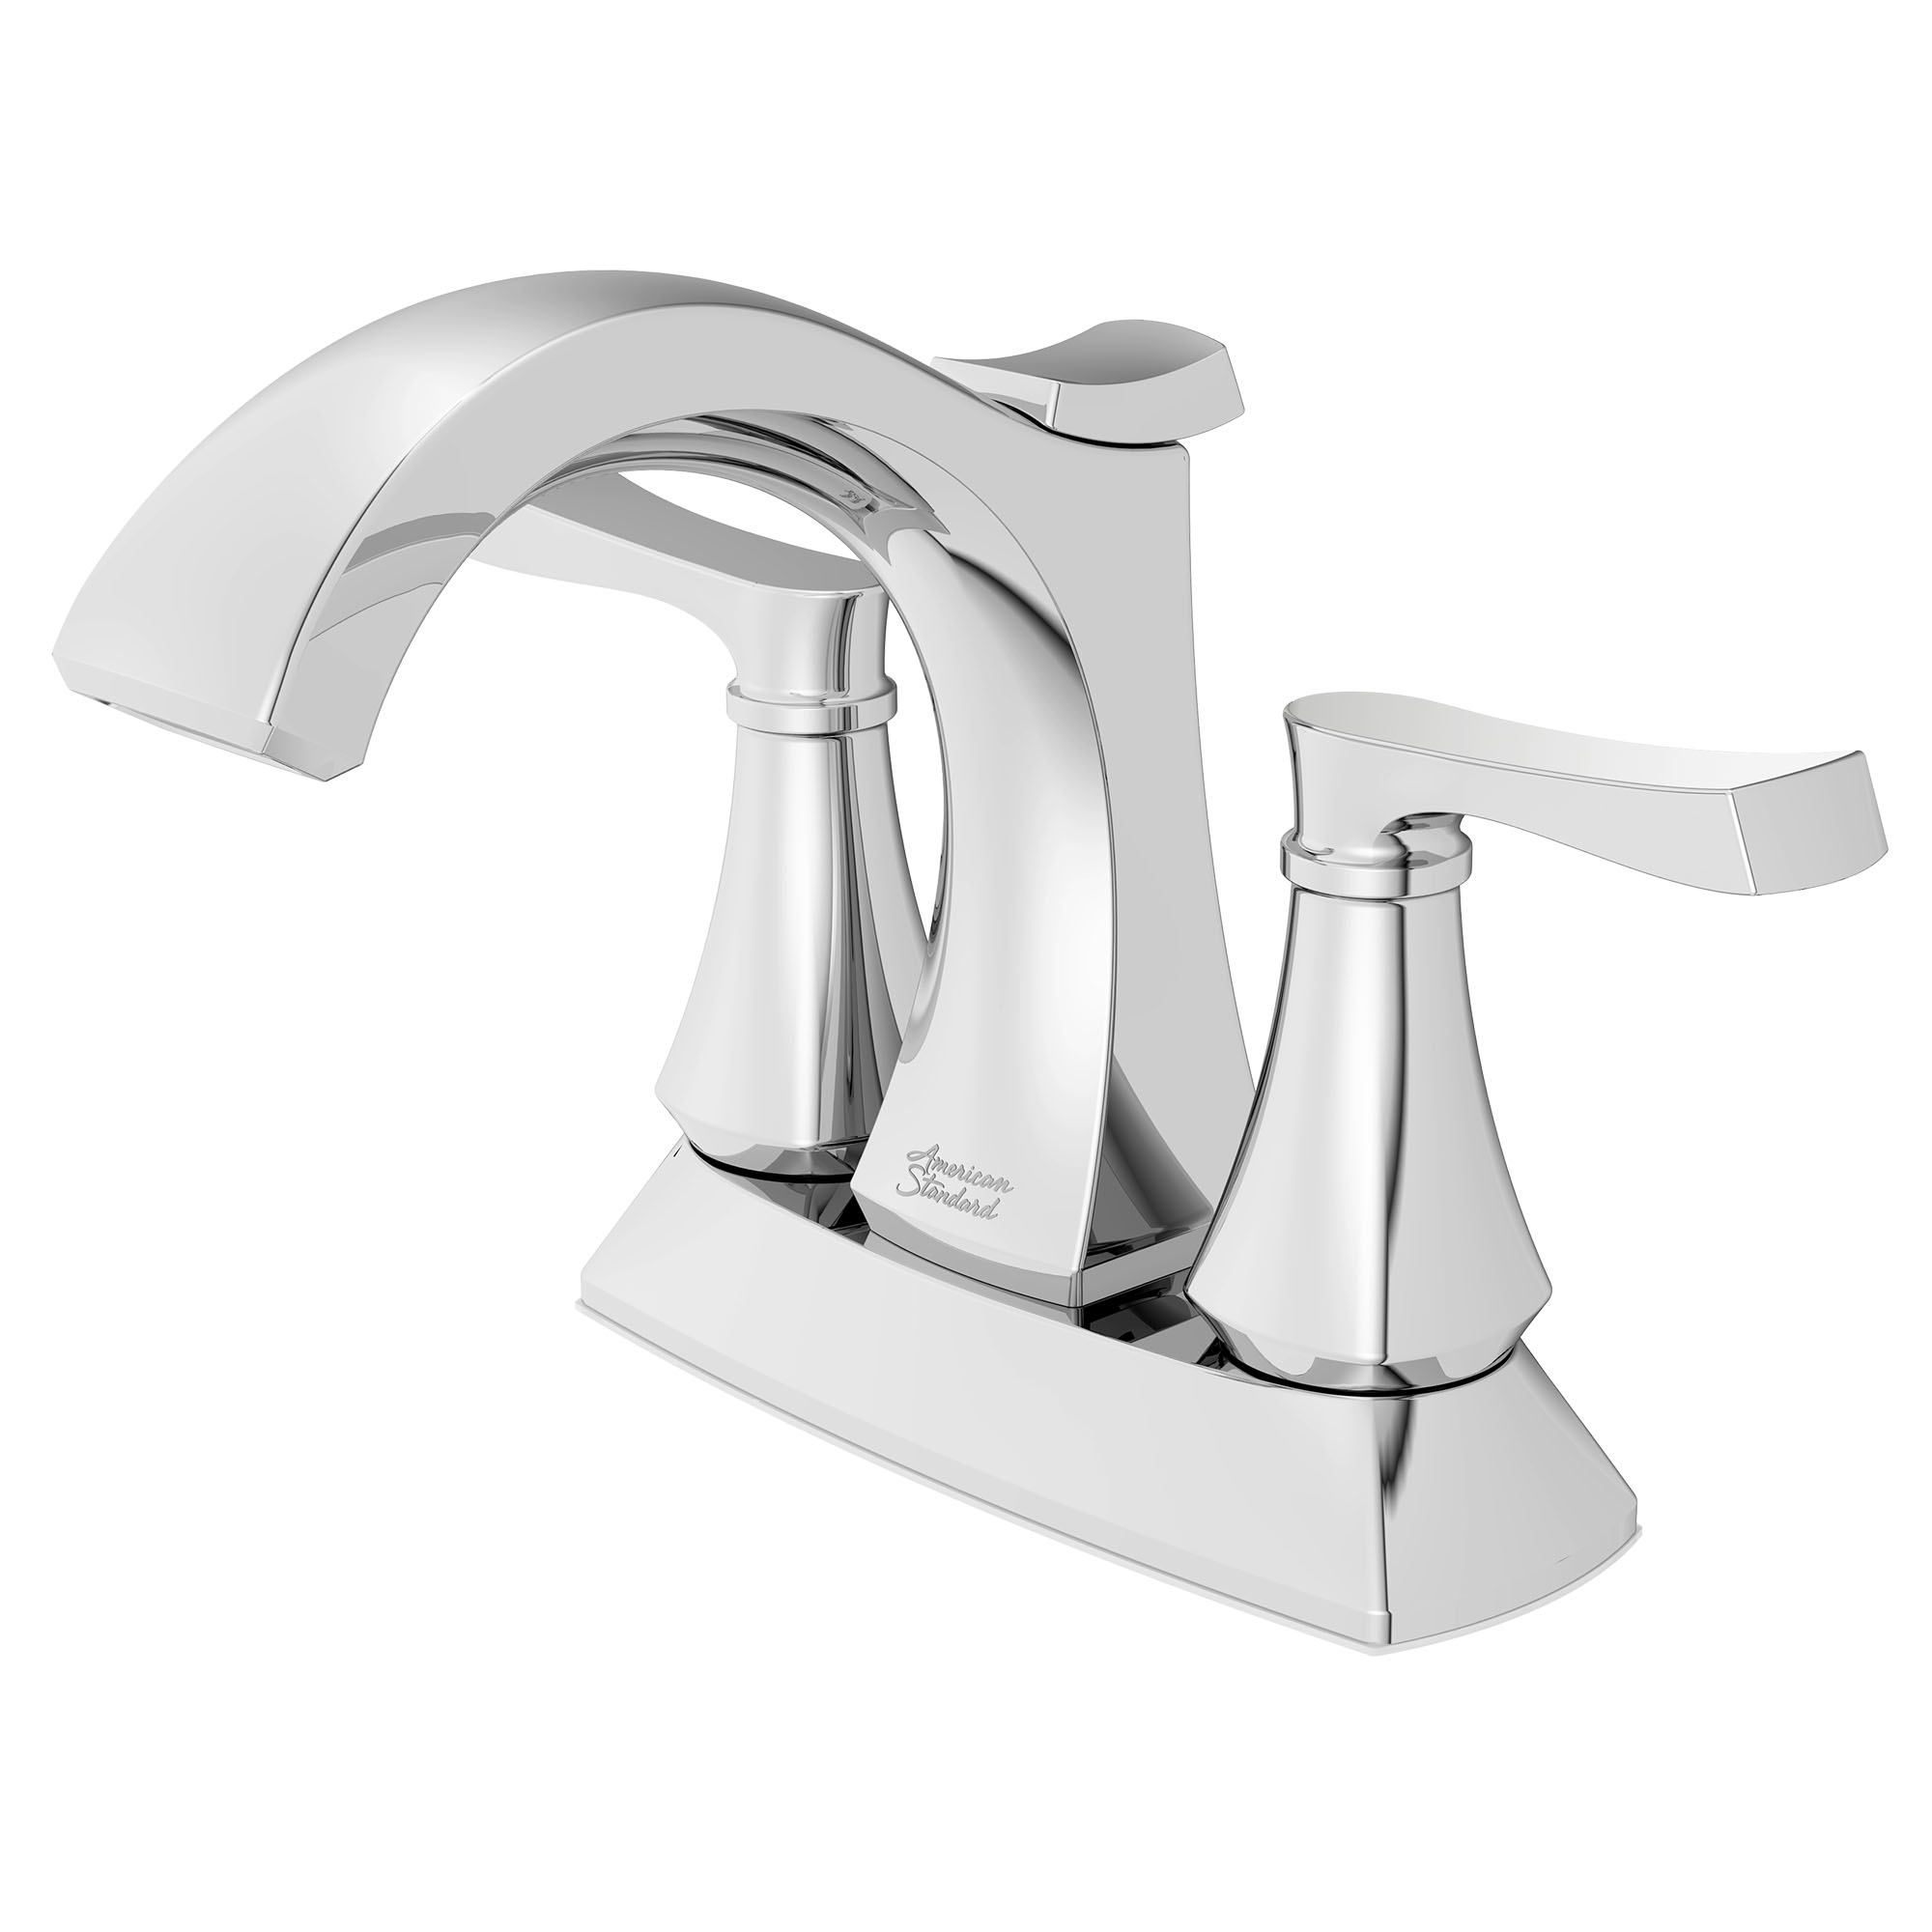 Kaleta 4-In. Centerset 2-Handle Bathroom Faucet 1.5 GPM with Lever Handles